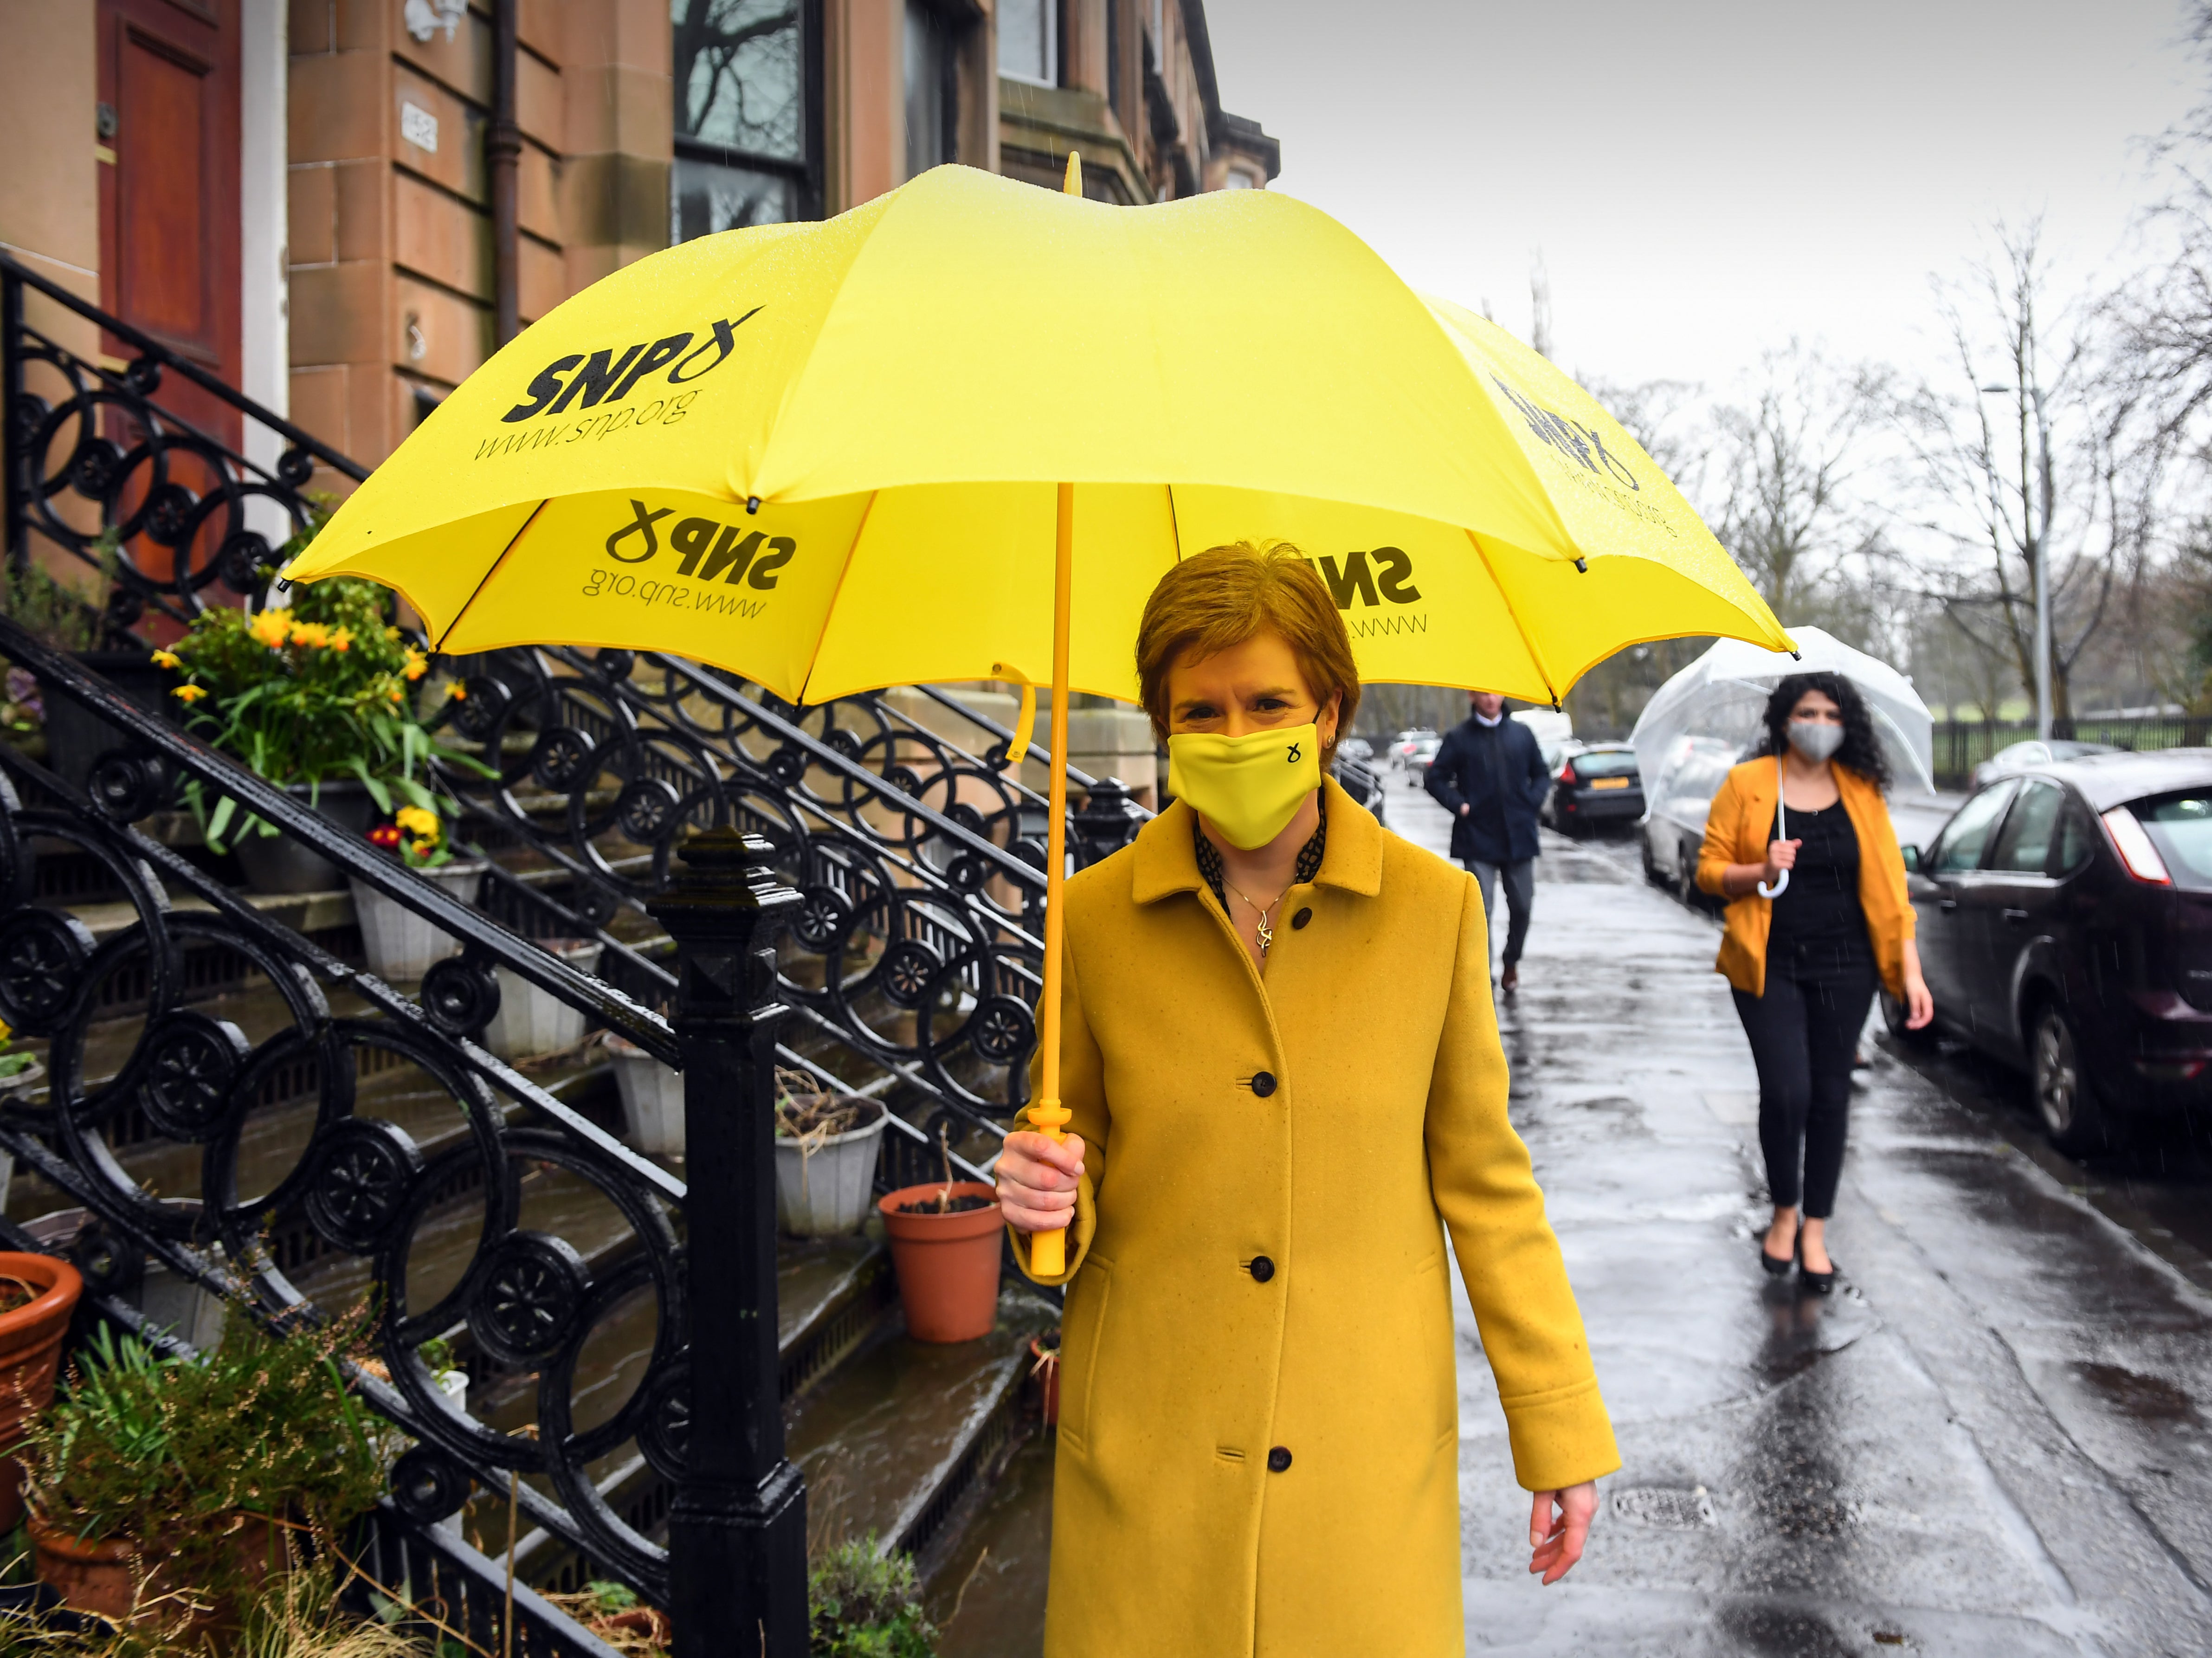 Nicola Sturgeon out campaigning in Glasgow